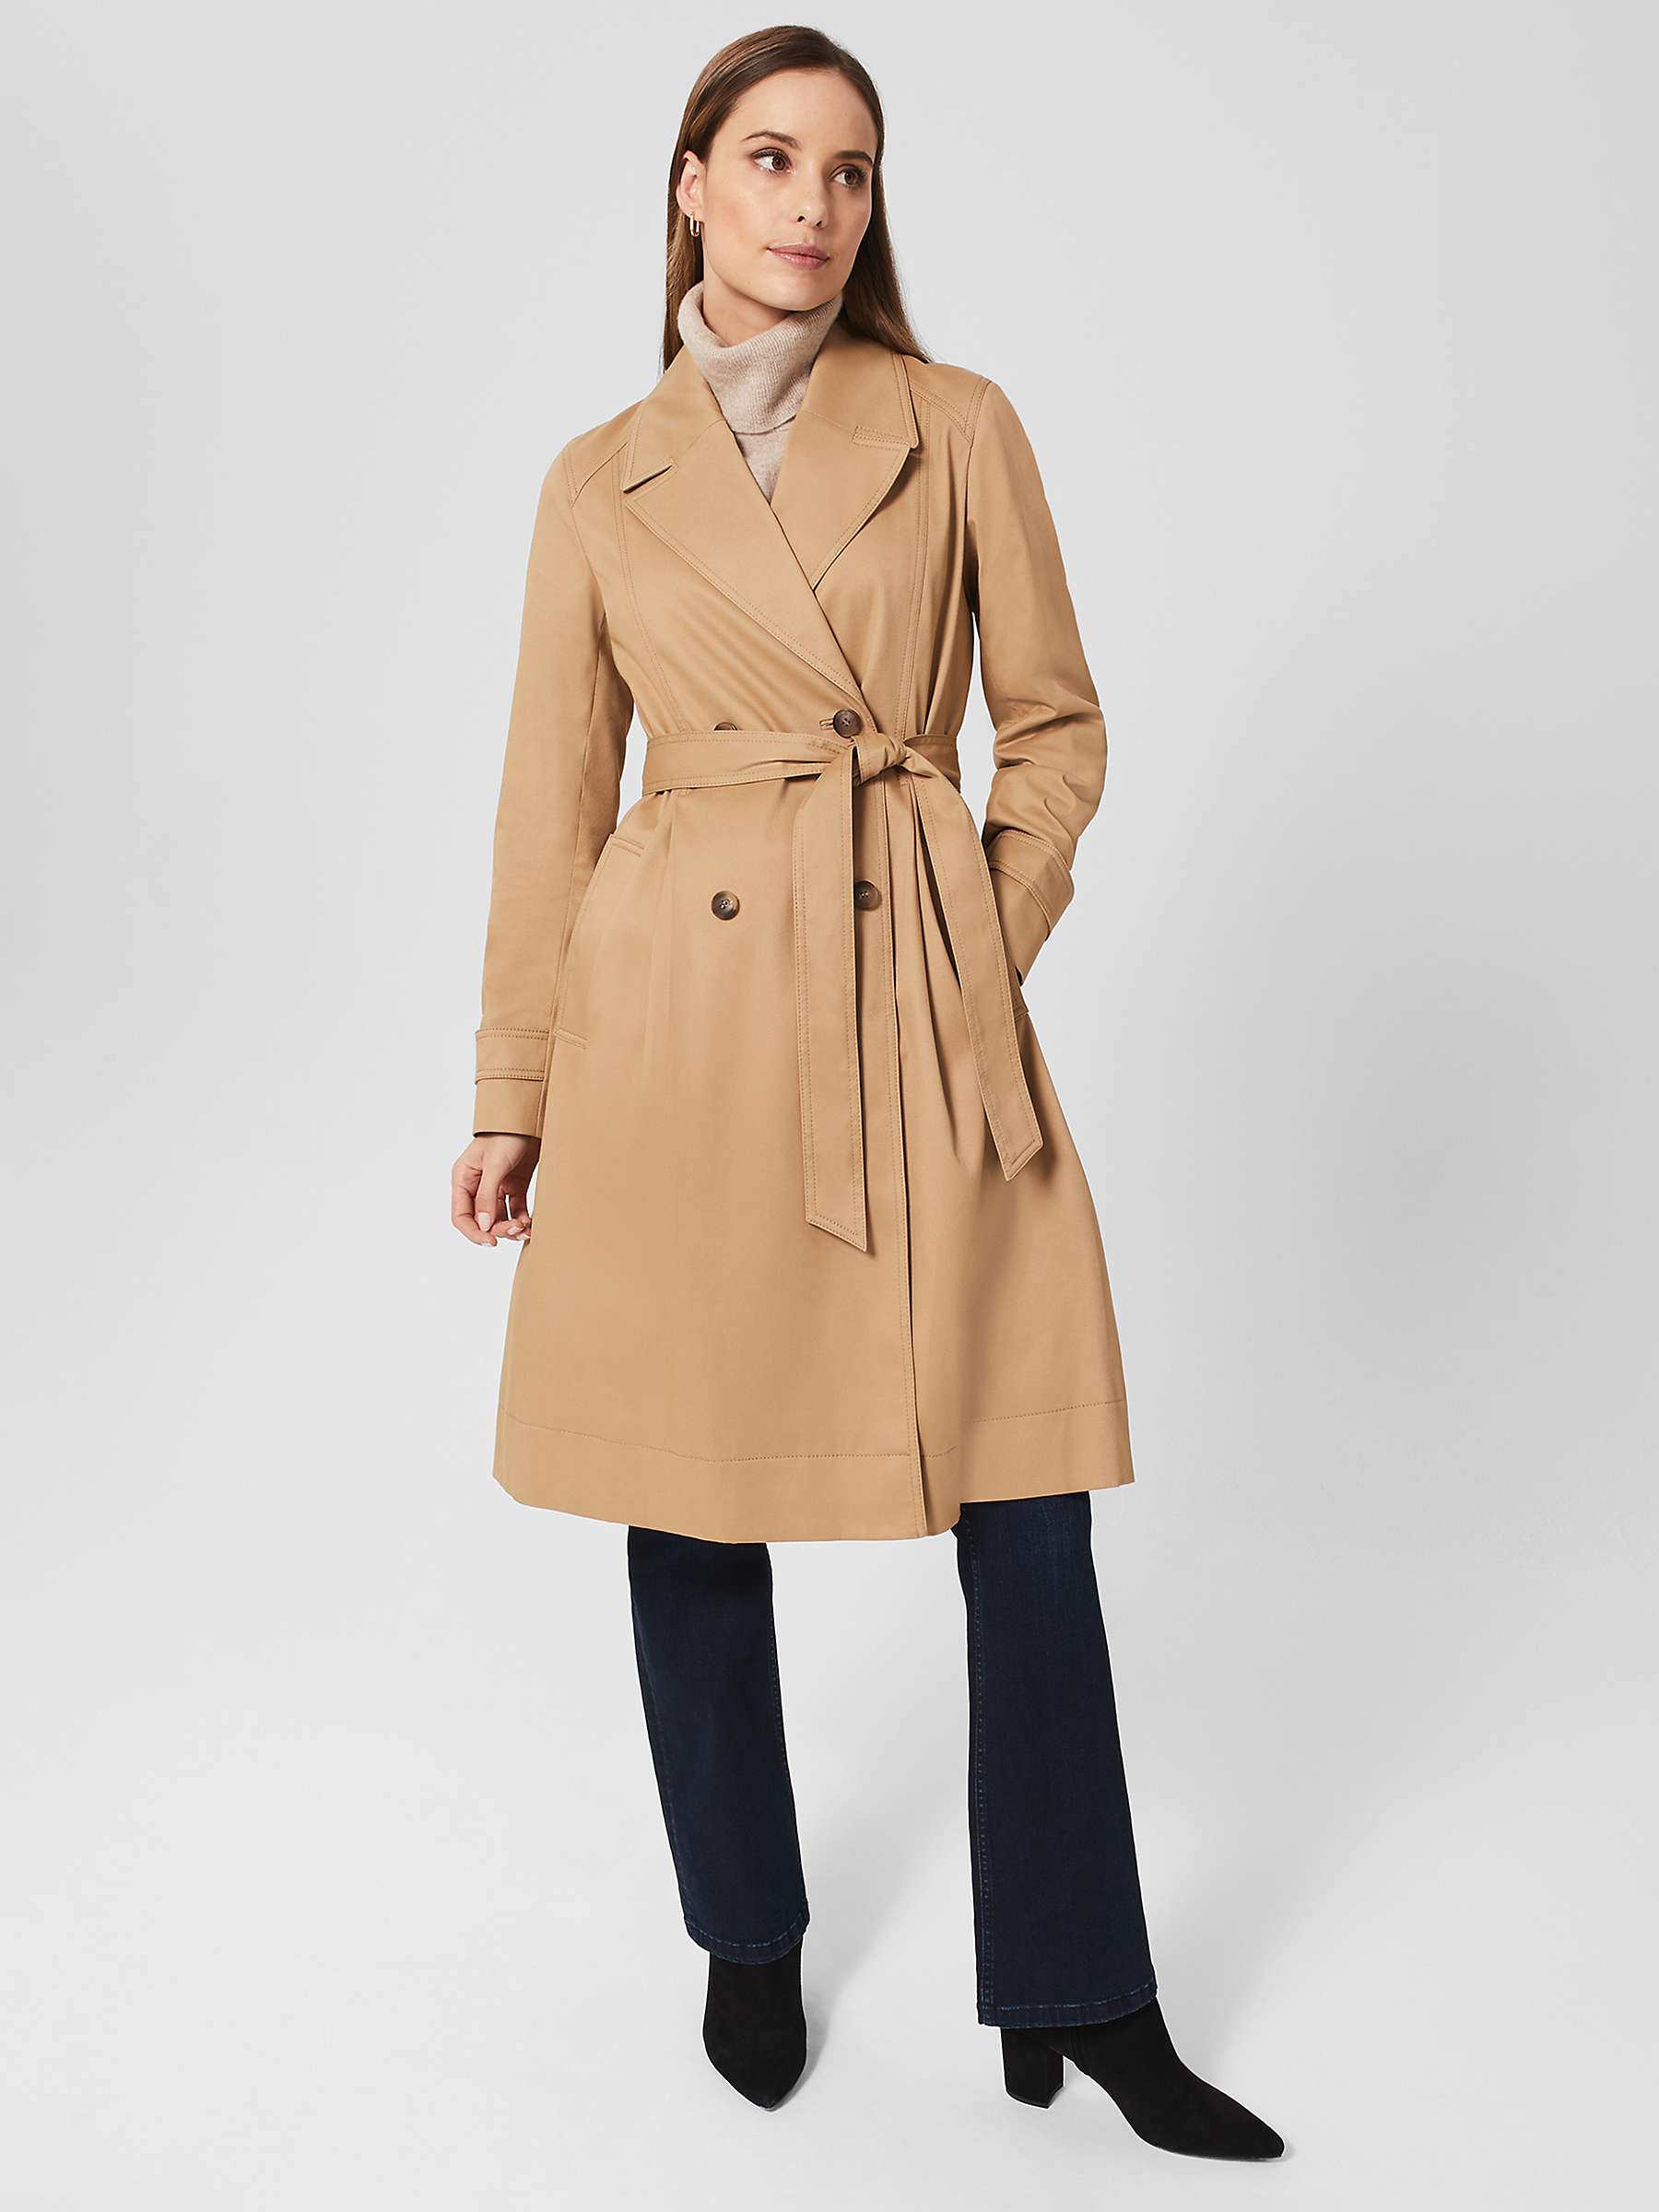 Hobbs Ashleigh Trench Coat, Fawn Beige at John Lewis & Partners